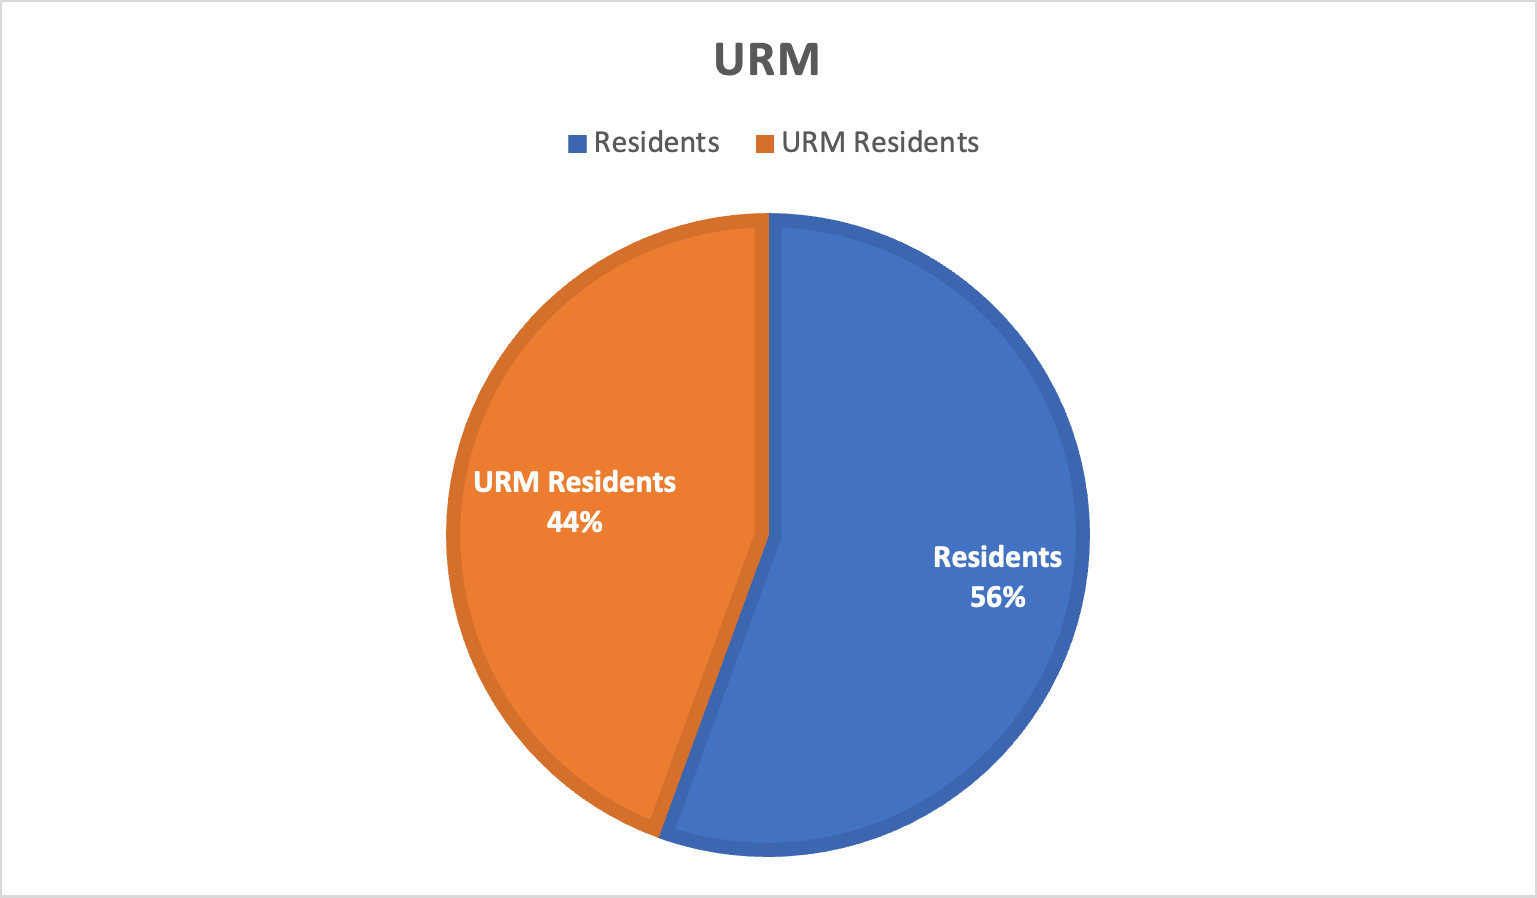 URM pie chart showing 44% URM Residents in orange, and 56% Residents in blue.